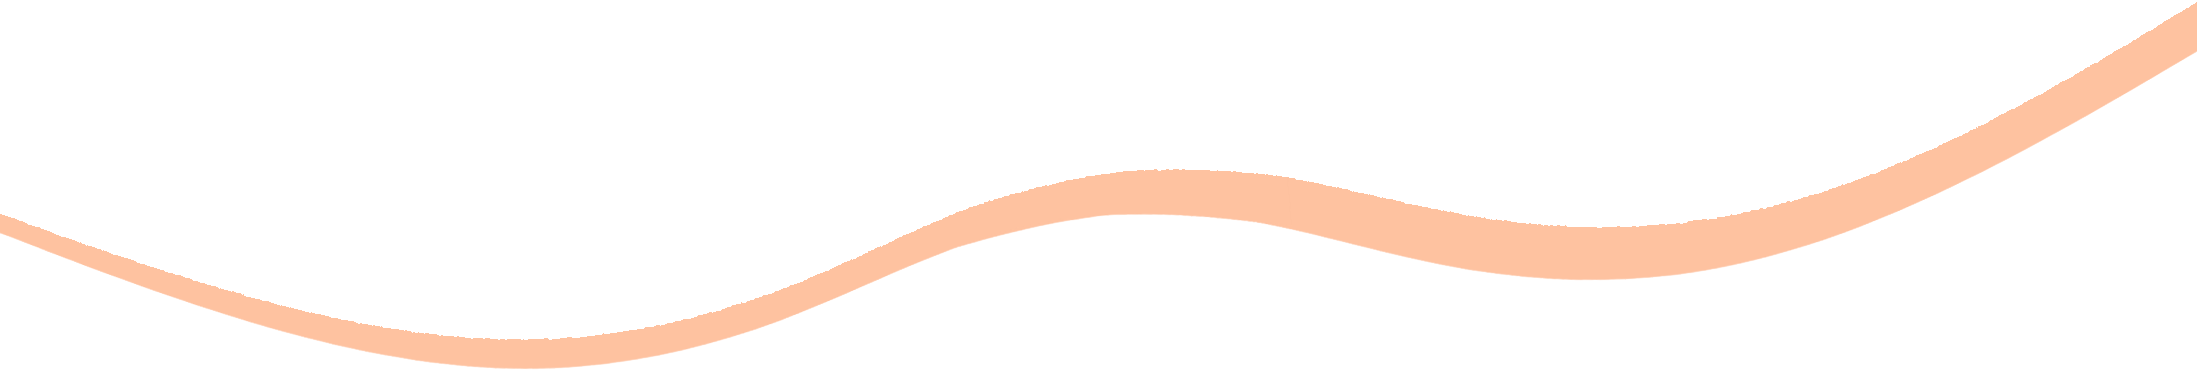 wave-top-transparent-left-to-right